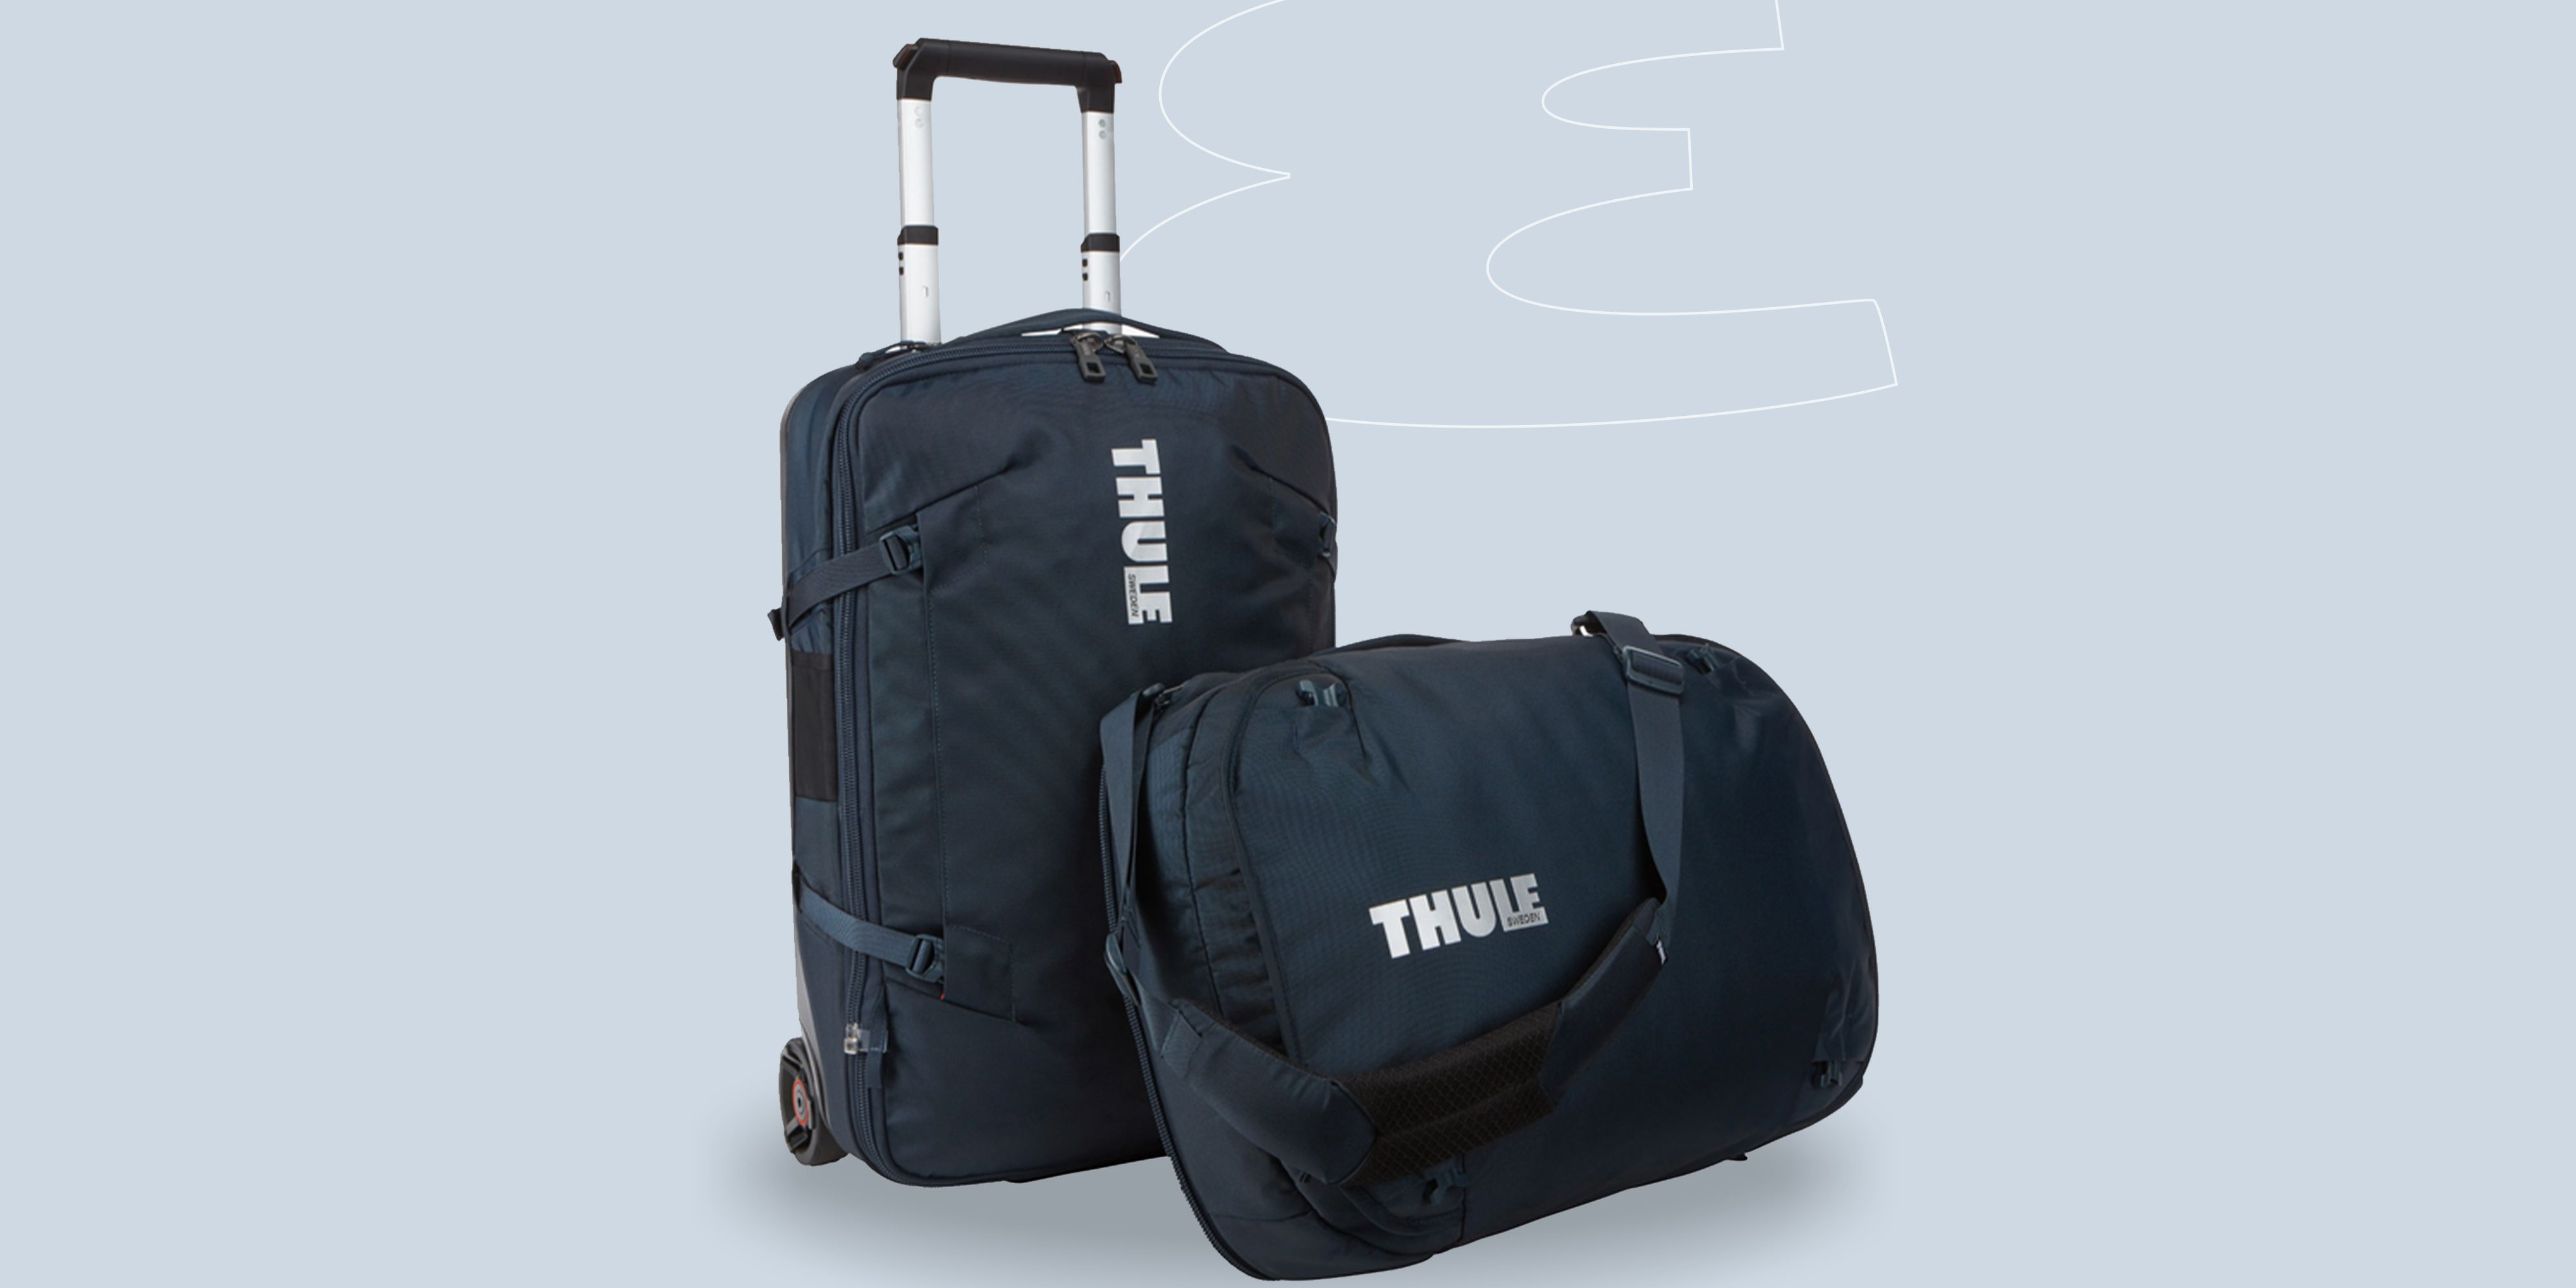 <p class="body-dropcap">For shorter trips, visits to places with uneven terrain, or a convenient additional piece of <a href="https://www.esquire.com/style/mens-accessories/g26293128/best-luggage-suitcase-brands/">luggage</a>, a rolling <a href="https://www.esquire.com/style/mens-accessories/g40274250/best-duffel-bags-for-men/">duffel bag</a> can be extremely useful. These bags have the same design and everything you love about your favorite duffel bag: a wide open space for storage, soft-side zipping, and lightweight construction. The wheels on the bottom (there are usually two, rather than four, like on <a href="https://www.esquire.com/lifestyle/a42659320/rimowa-carryon-suitcase-review/">our favorite Rimowa carry-on</a>), give you more freedom to lug that bag wherever you need. </p><p>Some smaller capacity rolling <a href="https://www.esquire.com/lifestyle/a44764816/halfday-garment-duffel-review/">duffels</a> are great to use as <a href="https://www.esquire.com/style/mens-accessories/g37516590/best-carry-on-luggage/">carry-ons</a>. It's easy to pack a bunch of stuff, but it won't feel quite as heavy when you can roll it rather than have to carry it. The bigger ones you'd need to check on a plane, for example, come in clutch for bringing on long-term trips and are easy to store in smaller spaces than your standard <a href="https://www.esquire.com/lifestyle/g60042947/best-luggage-sets/">suitcase</a>. </p><p>Here, we rounded up the 12 that do this rolling and duffel-ing combo job best. Most are made with a durable nylon or polyester, while there are other options that are a more functional waterproof or stylish leather. </p>